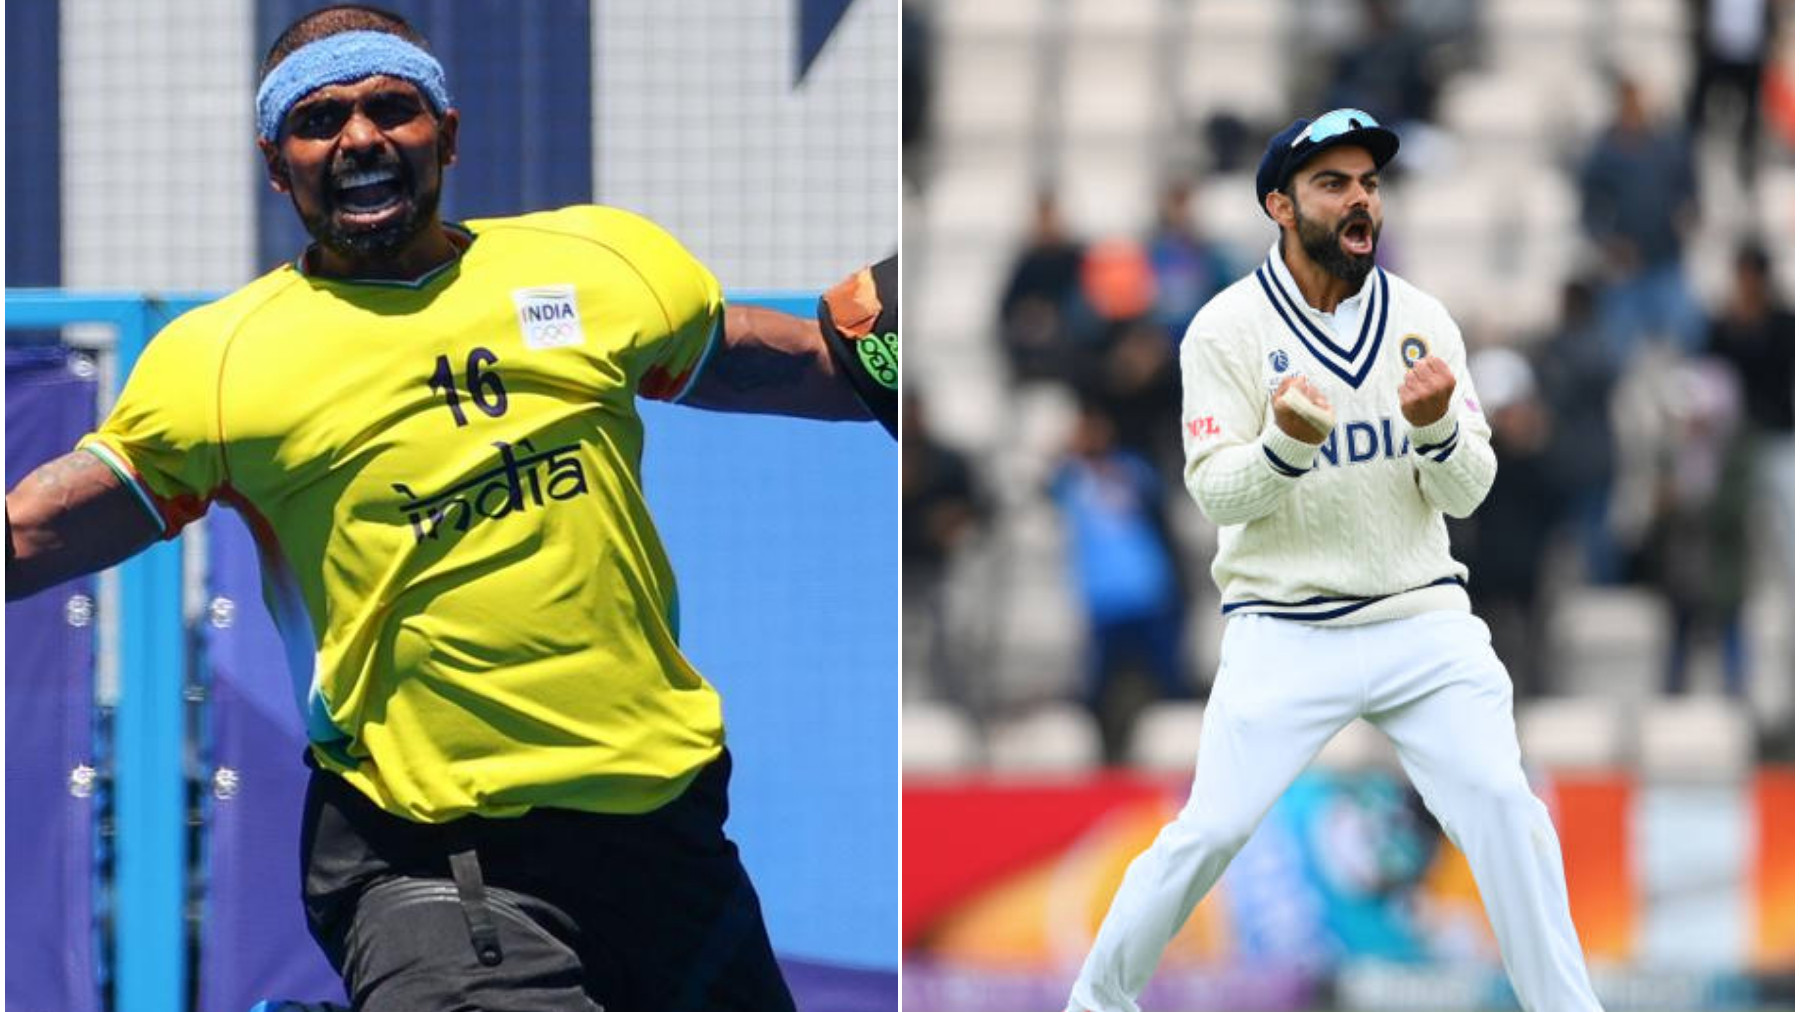 PR Sreejesh, India's hockey goalkeeper, reveals the best thing one can learn from Virat Kohli 